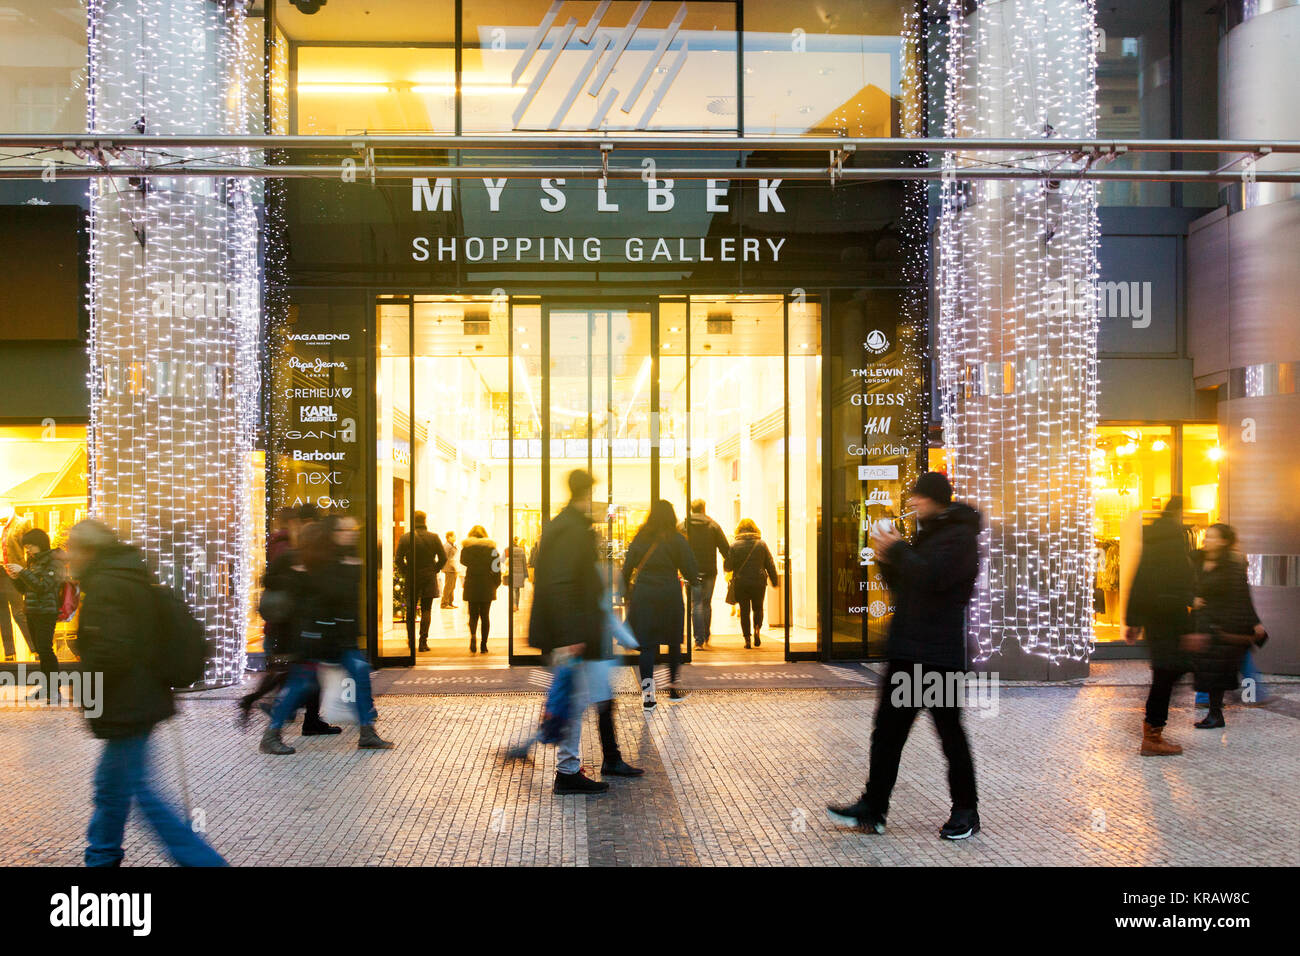 Myslbek Shopping High Resolution Stock Photography and Images - Alamy